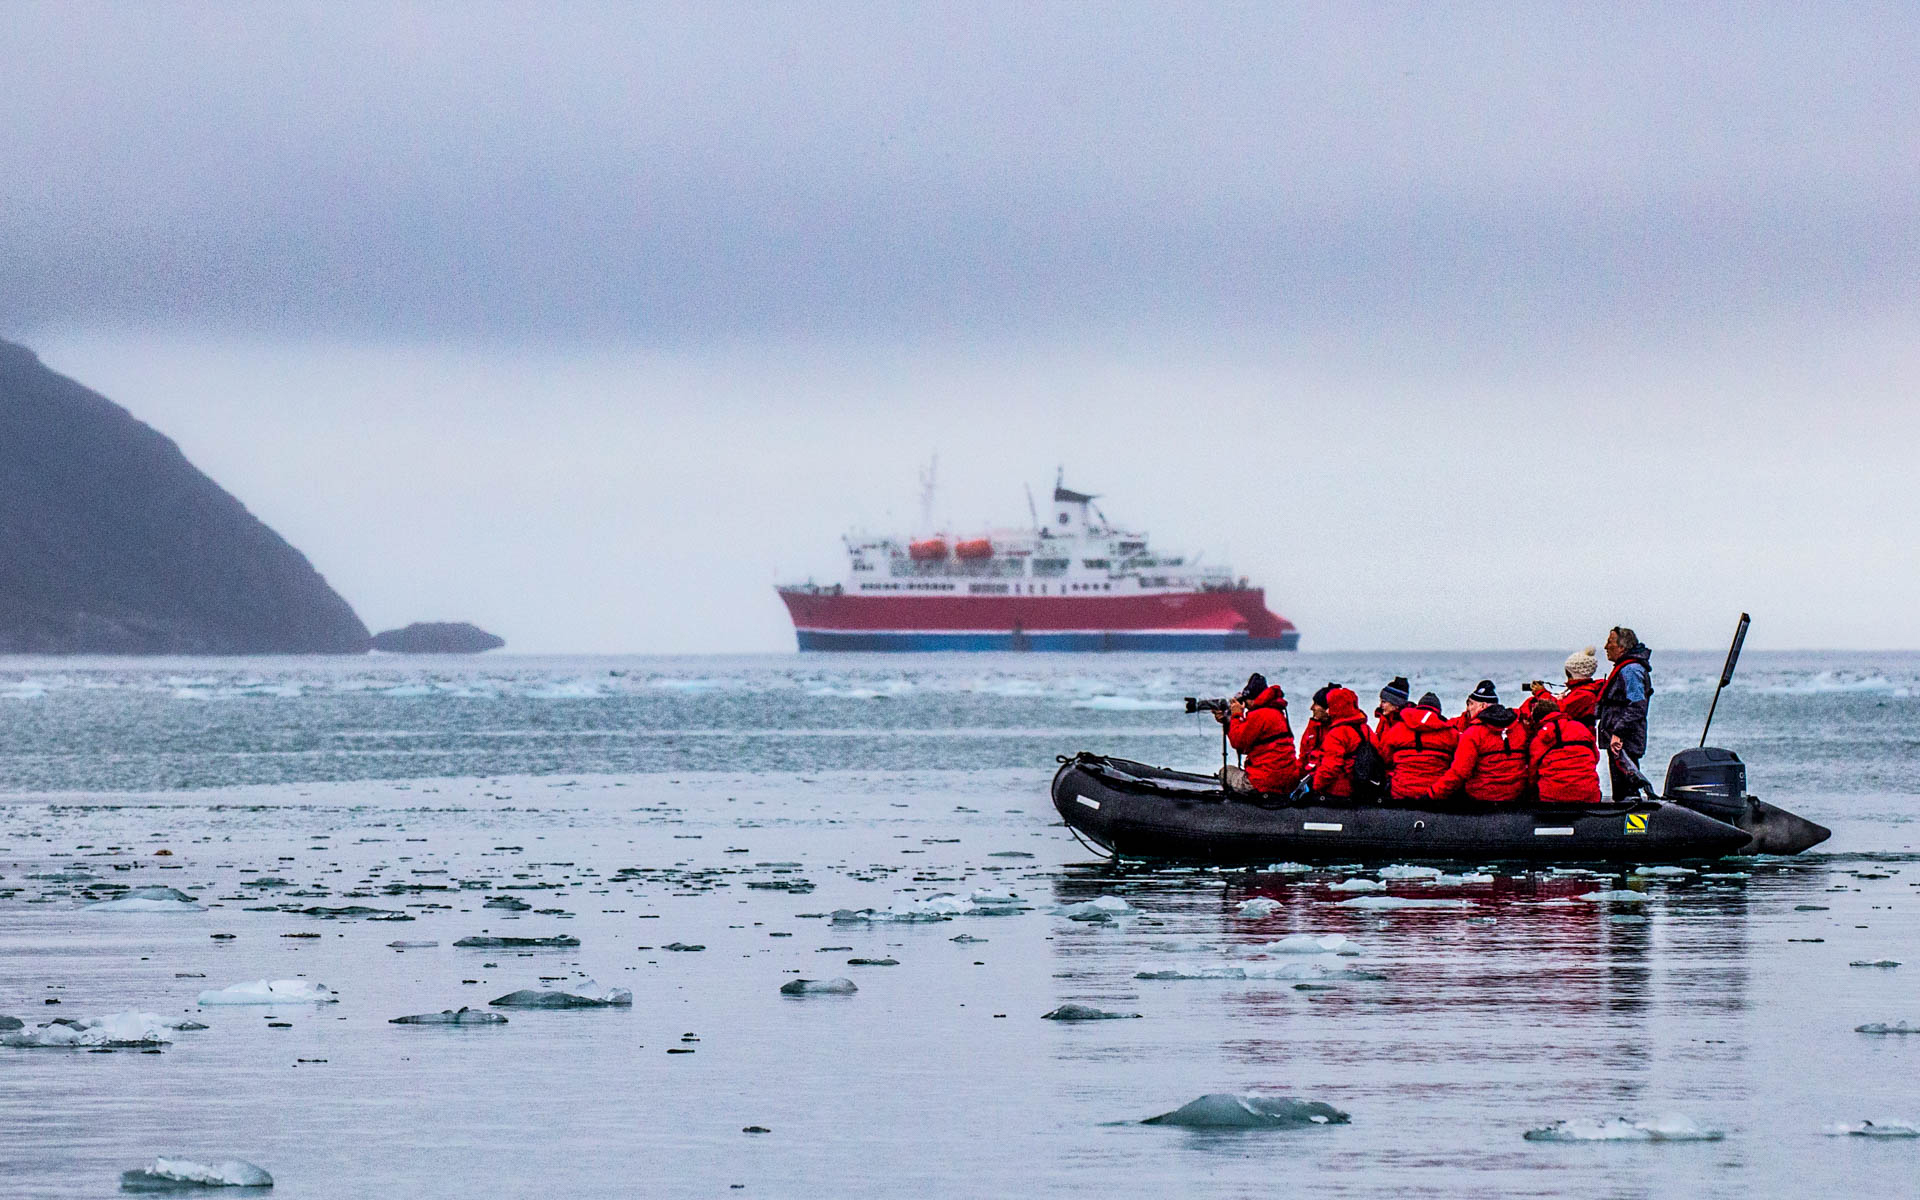 Arctic cruise travelers in red jackets take photographs of iceberg bits in the water on a Zodiac, with a small red polar ship in the background.